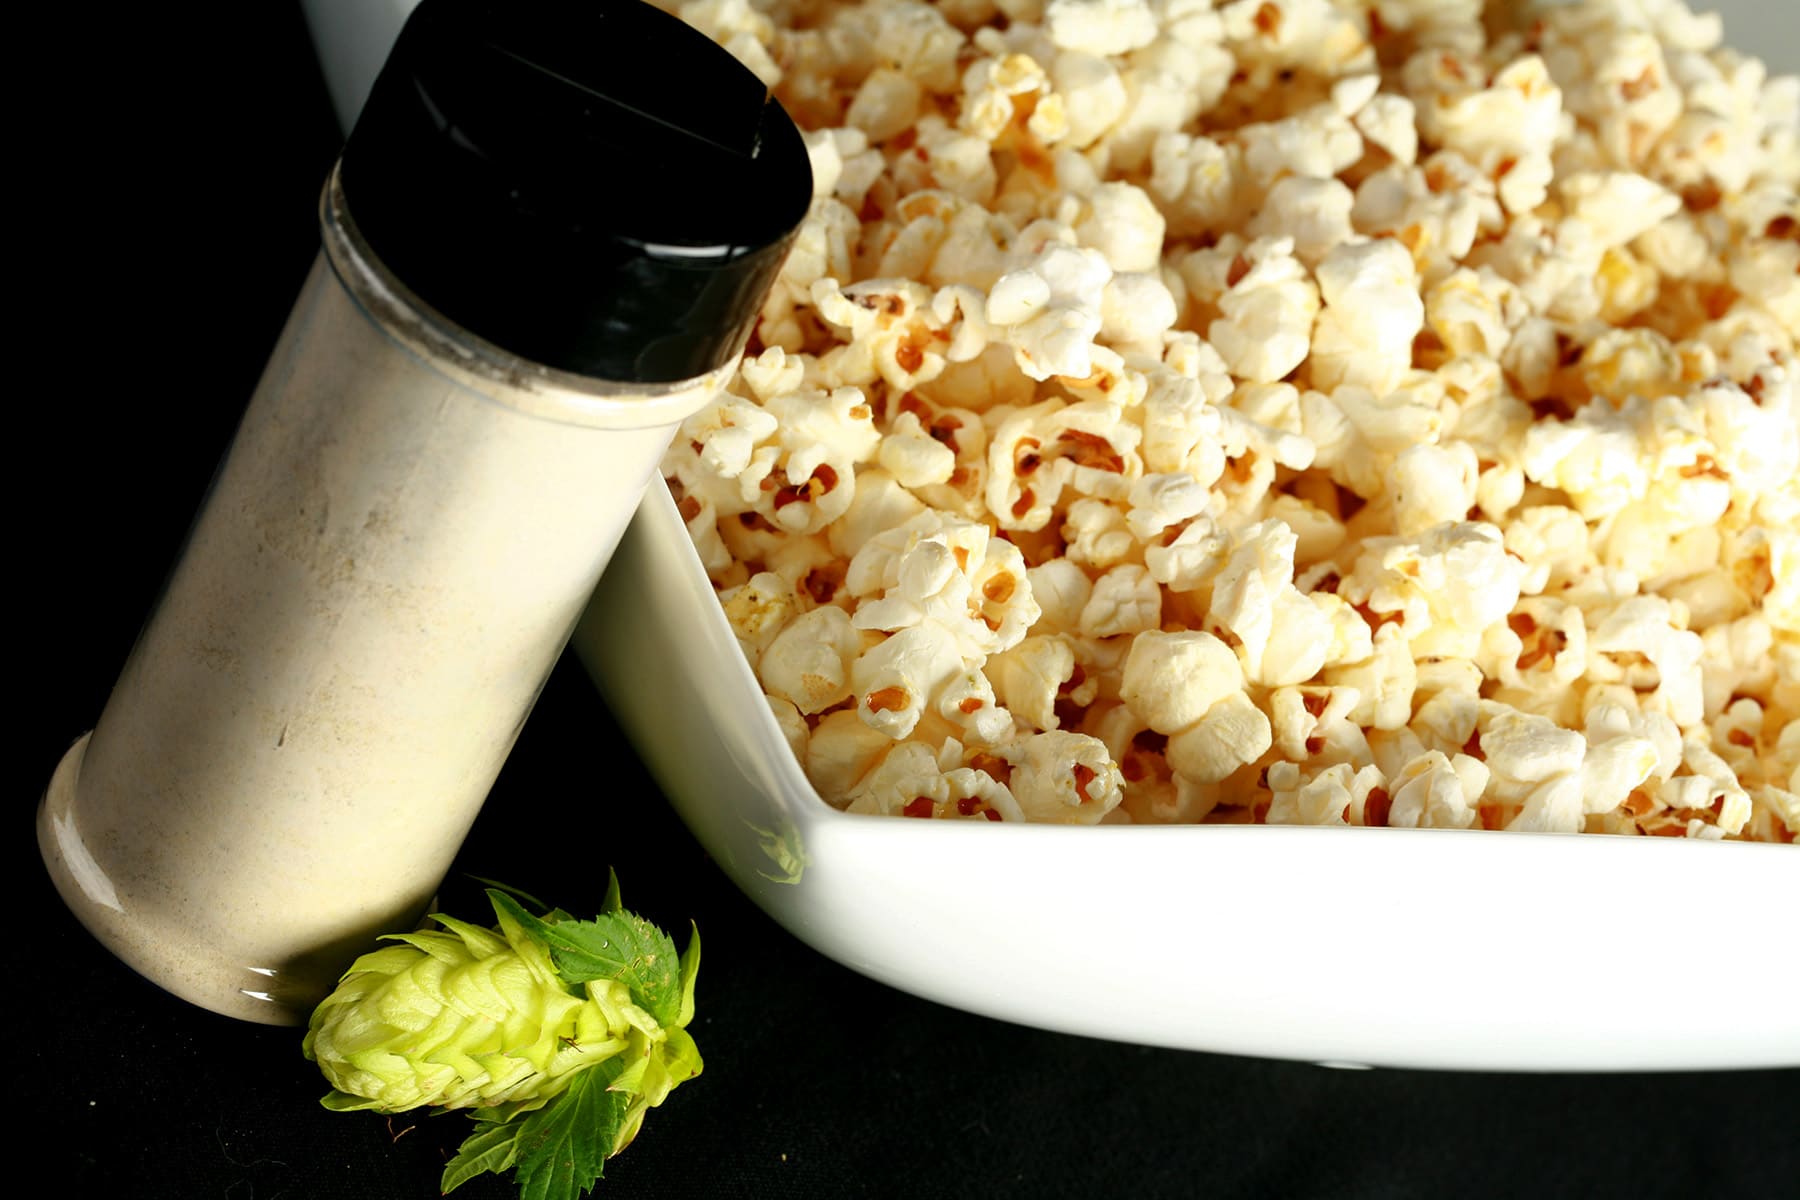 A large rectangular bowl holds hopped popcorn - hopcorn! There is a small canister of the popcorn seasoning, and a fresh hop flower next to the bowl.